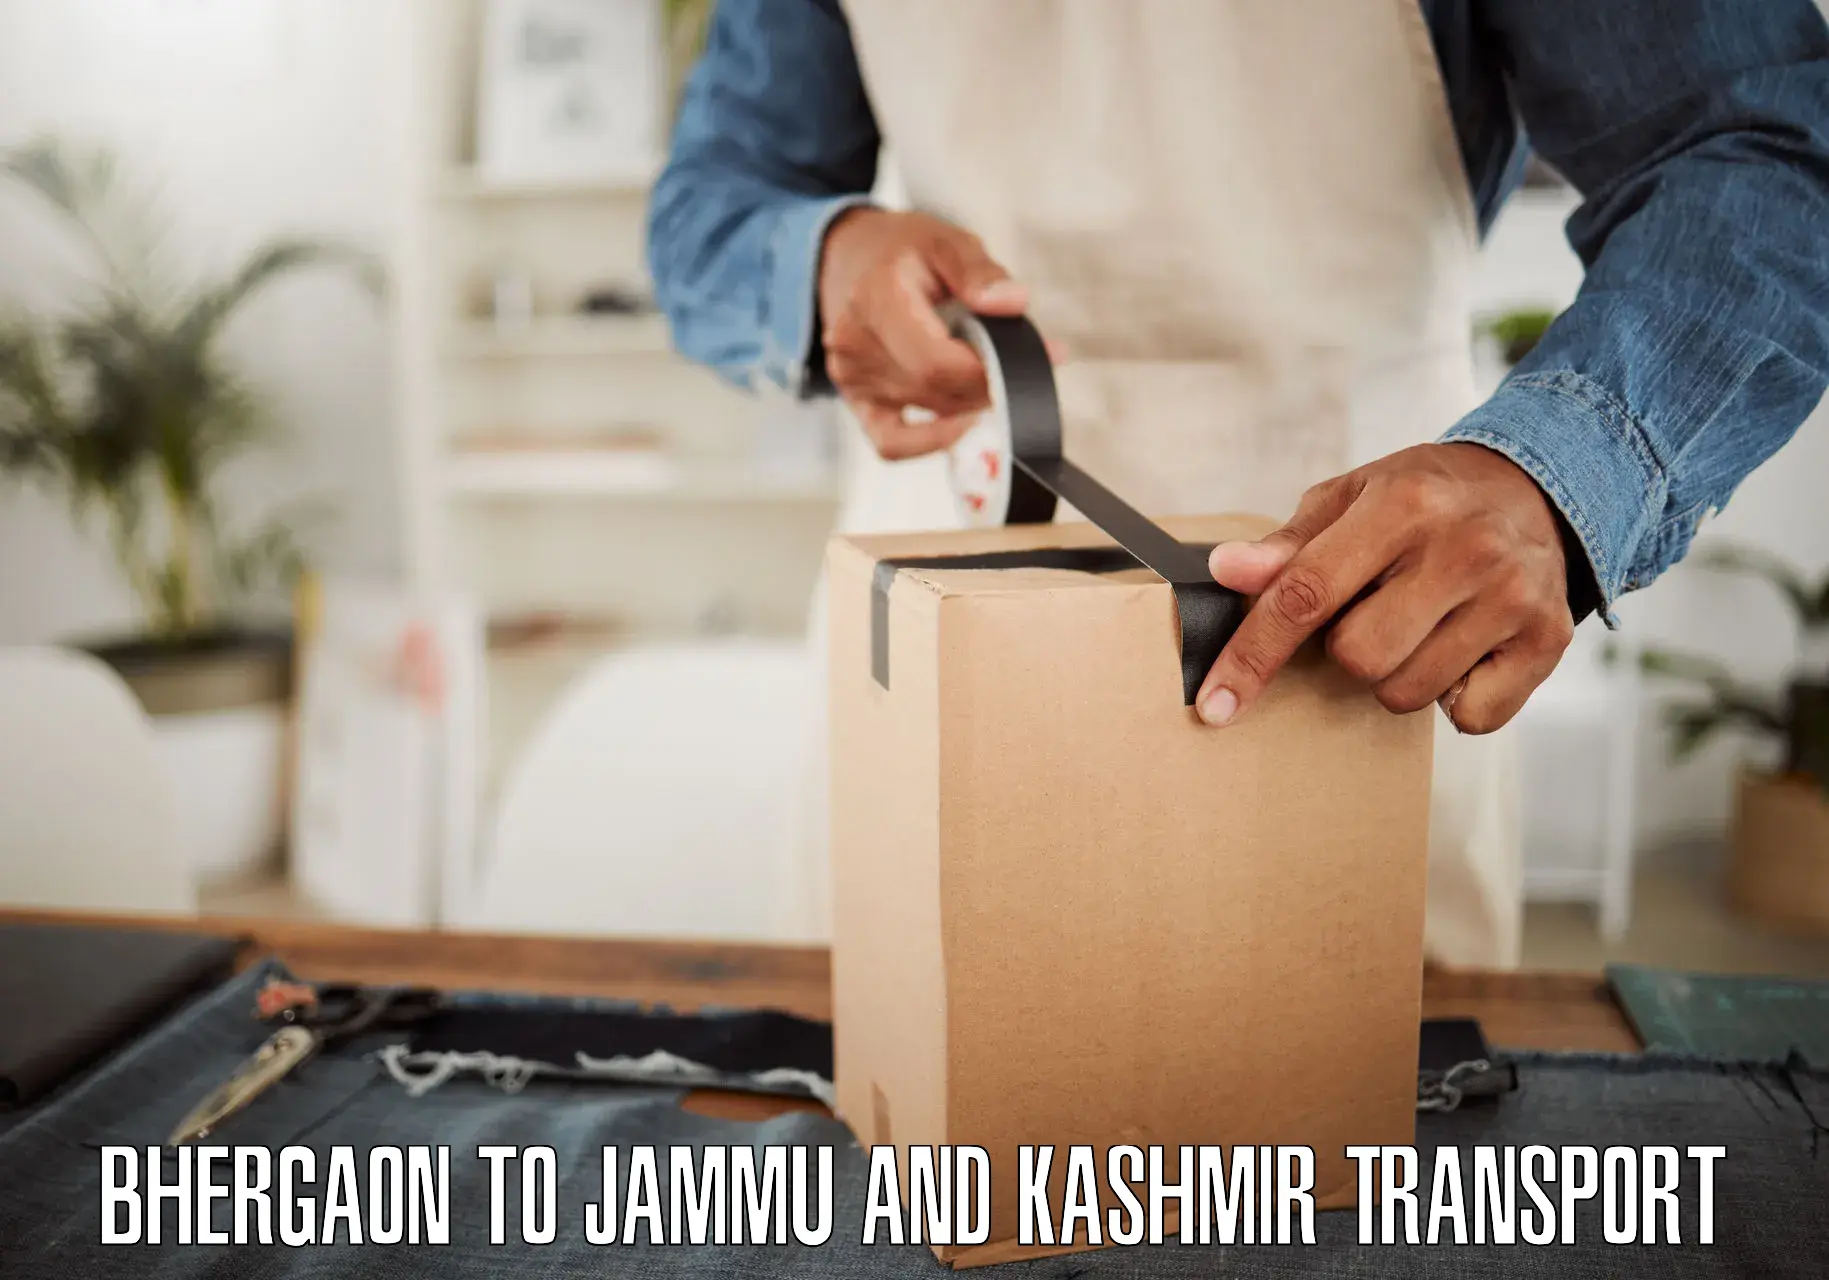 Sending bike to another city Bhergaon to Jammu and Kashmir